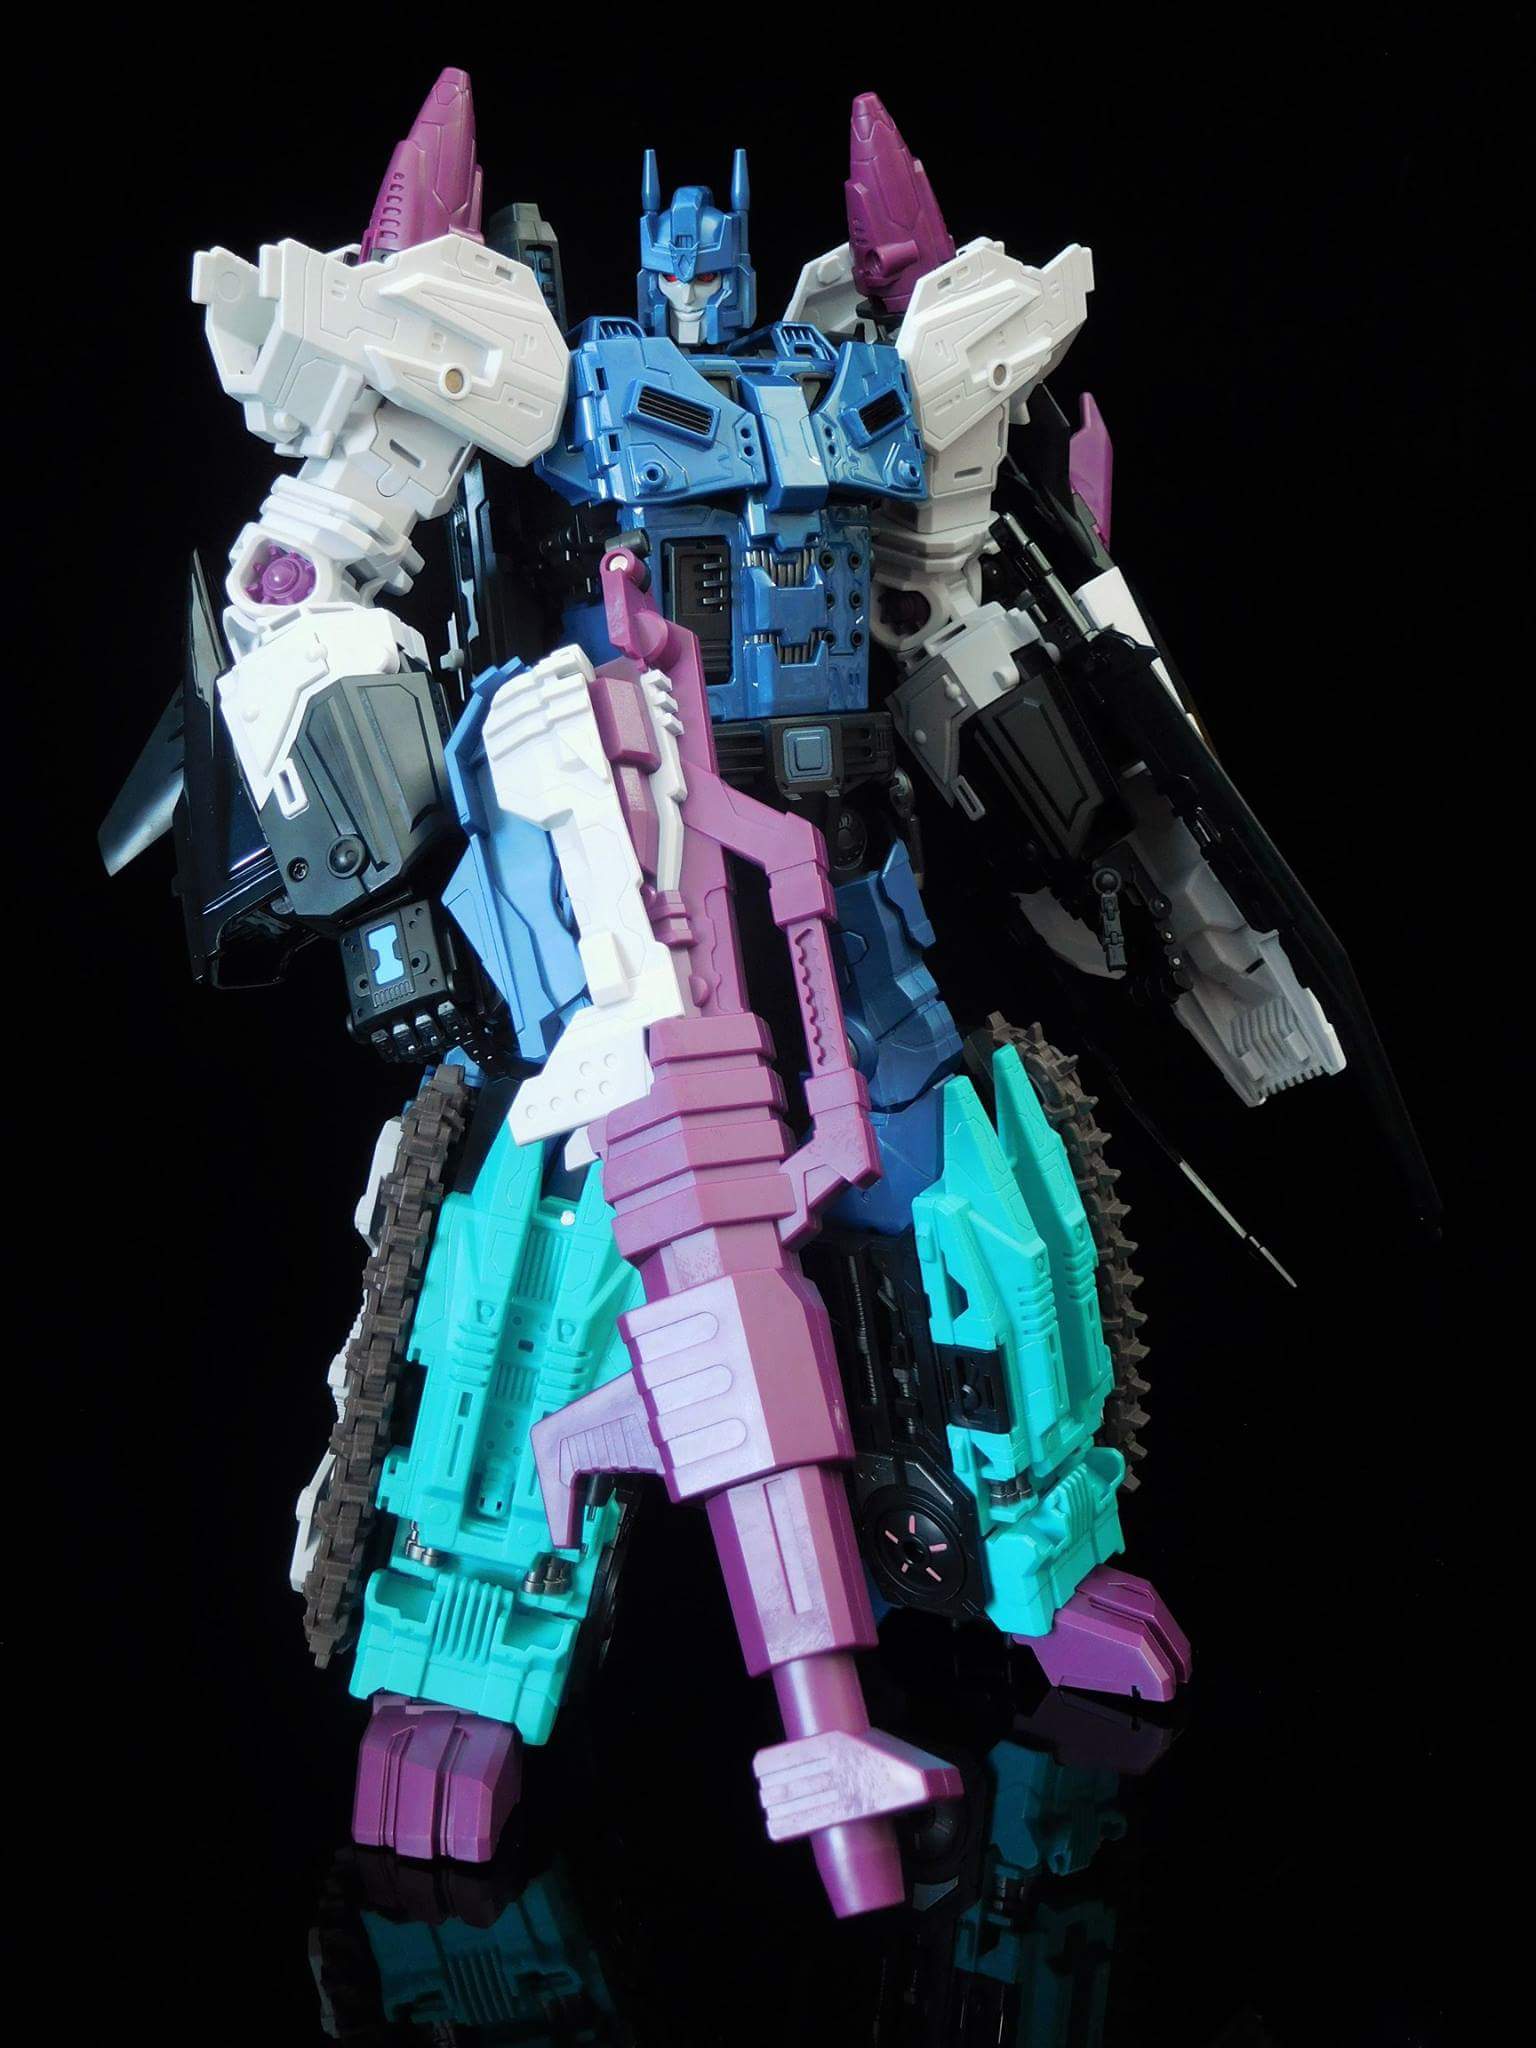 [Mastermind Creations] Produit Tiers - R-17 Carnifex - aka Overlord (TF Masterforce) - Page 3 UHGGcVcK